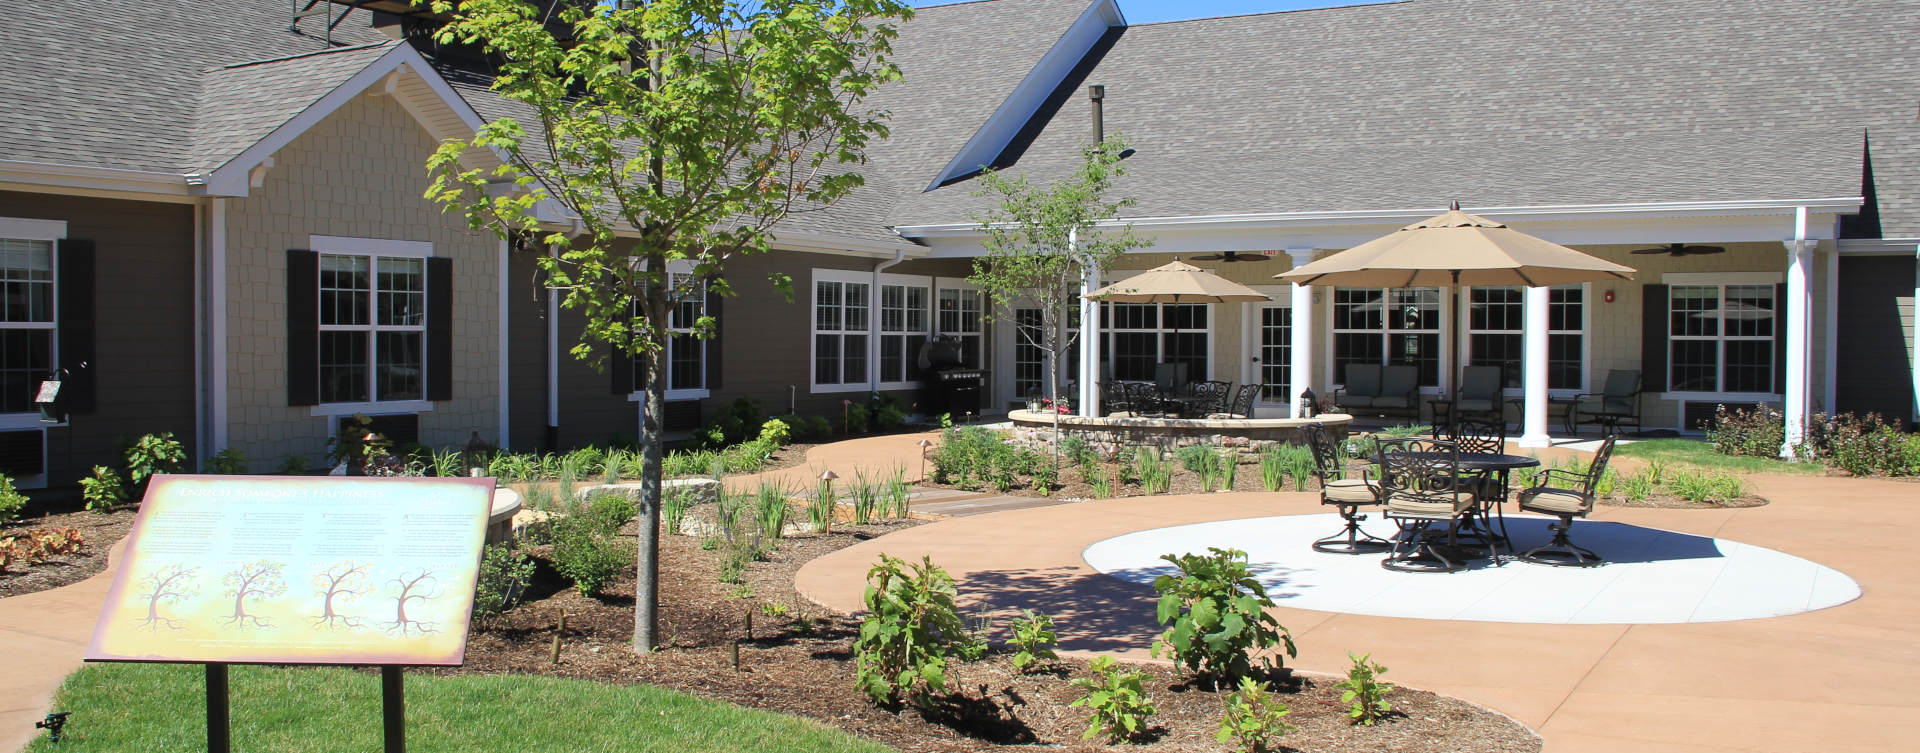 Enjoy bird watching, gardening and barbecuing in our courtyard at Bickford of Tinley Park